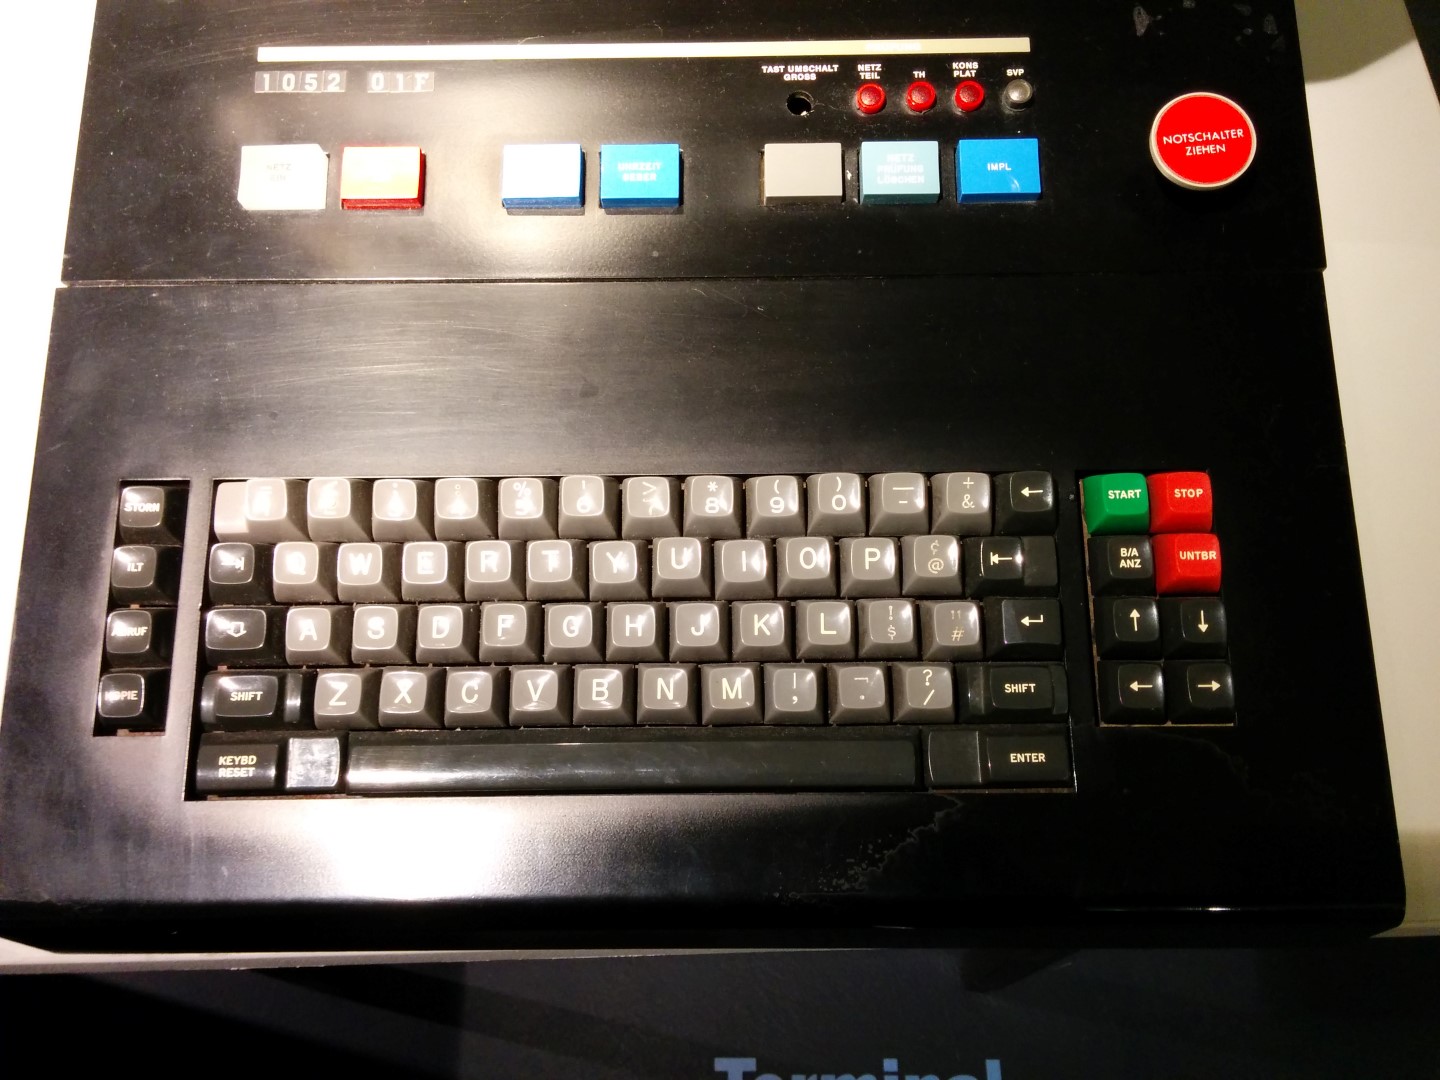 ... and its beam spring keyboard